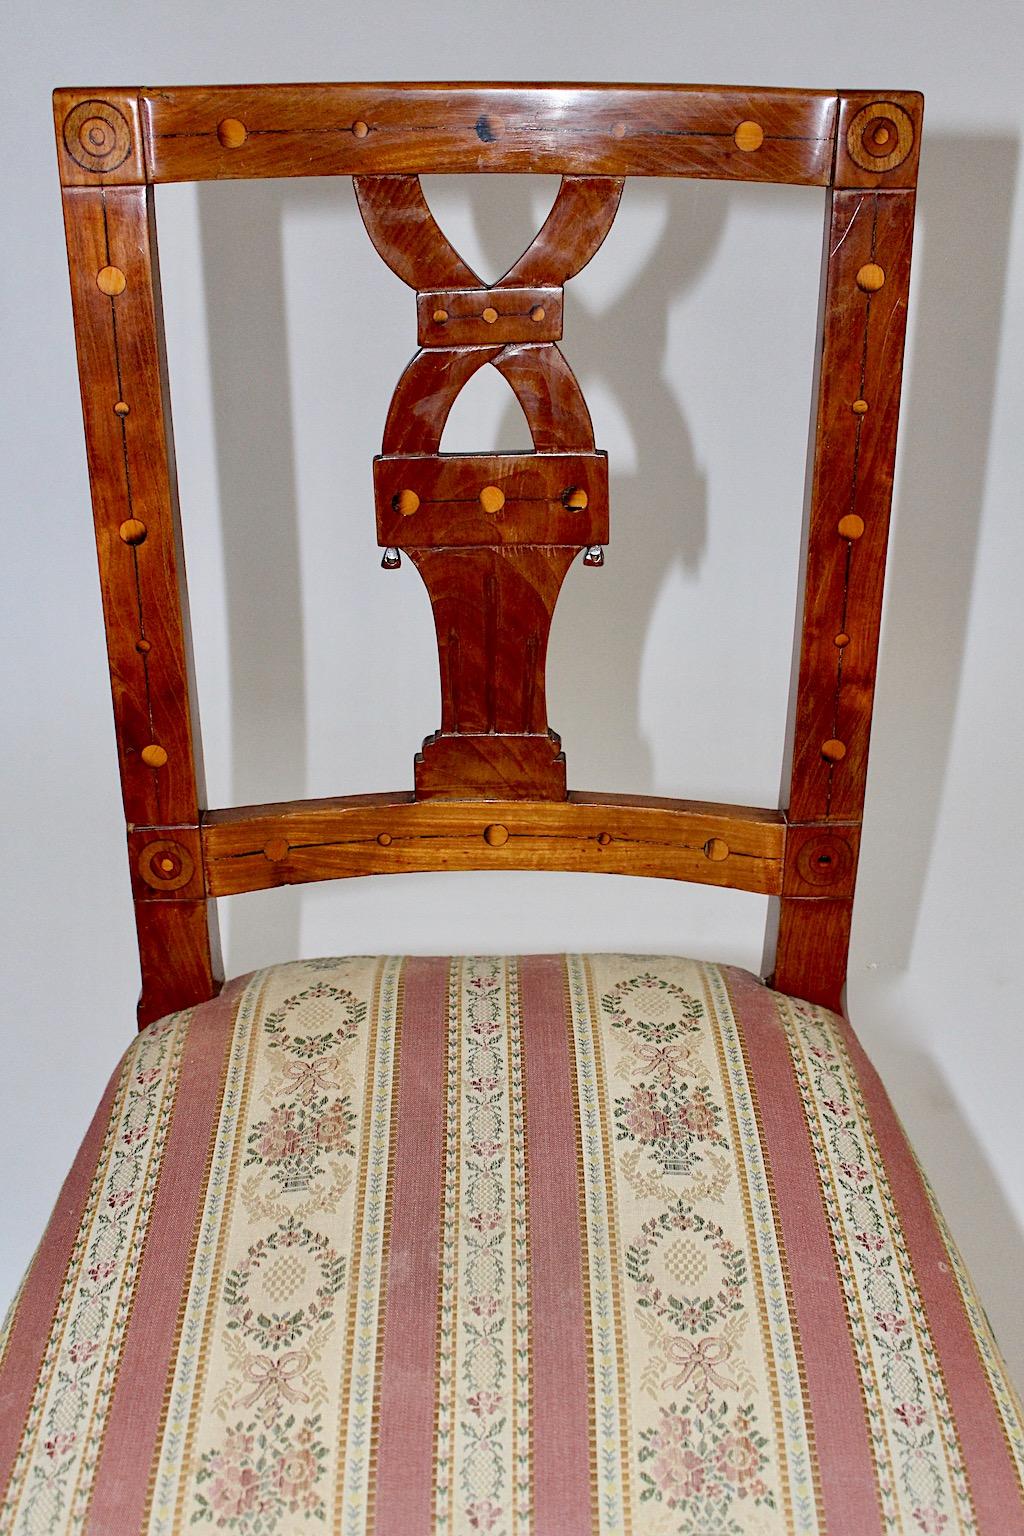 Upholstery Cherrywood Maple Rustic Side Chair circa 1780 Austria For Sale